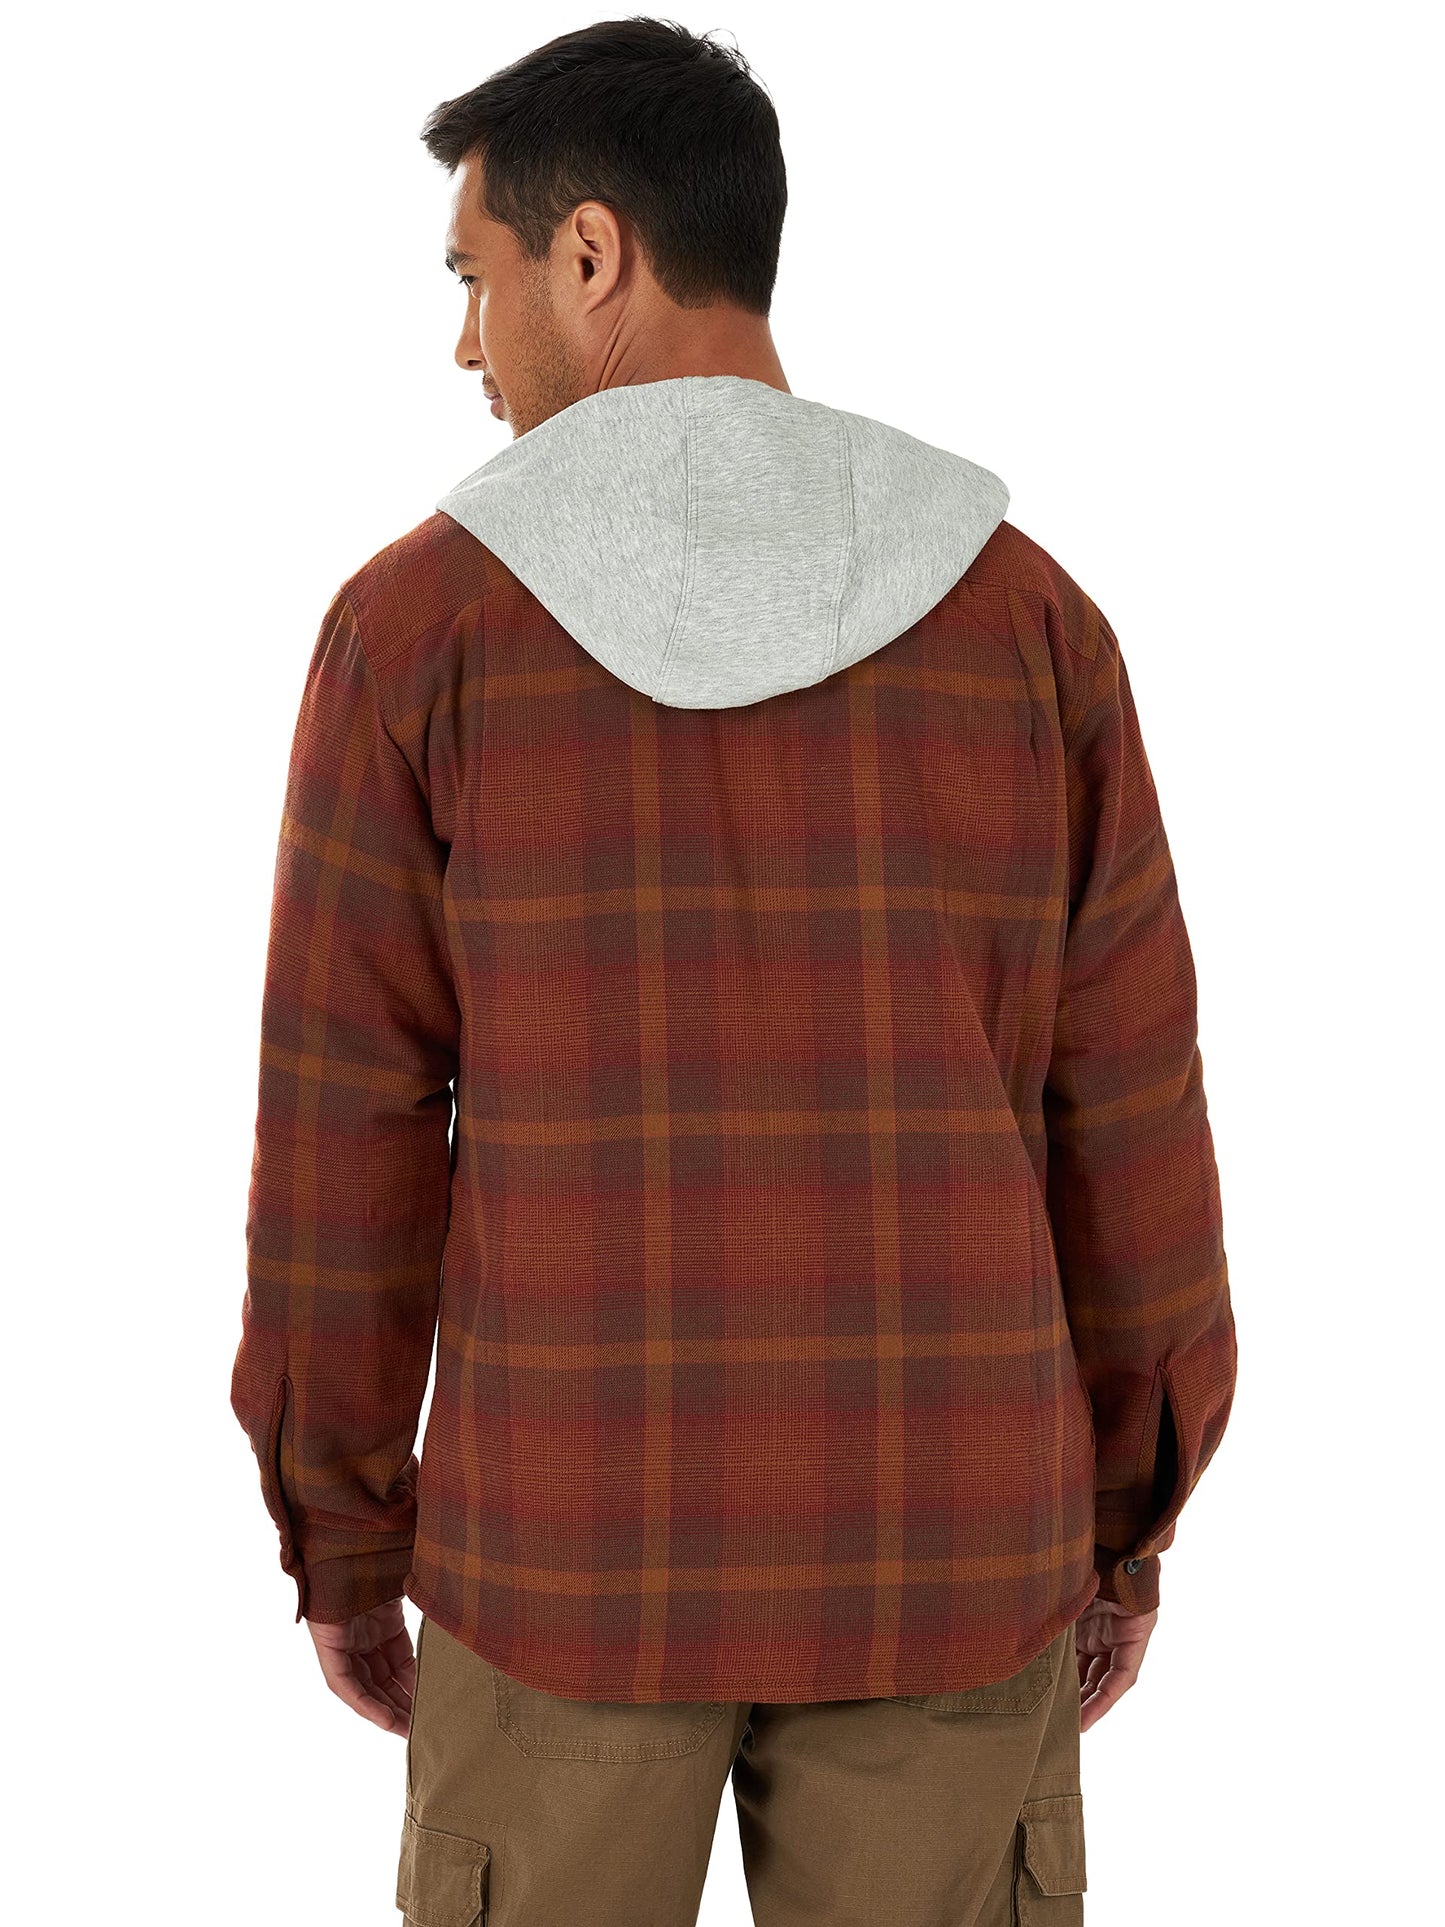 Wrangler Authentics Men's Long Sleeve Quilted Lined Flannel Shirt Jacket with Hood, Toffee, Large